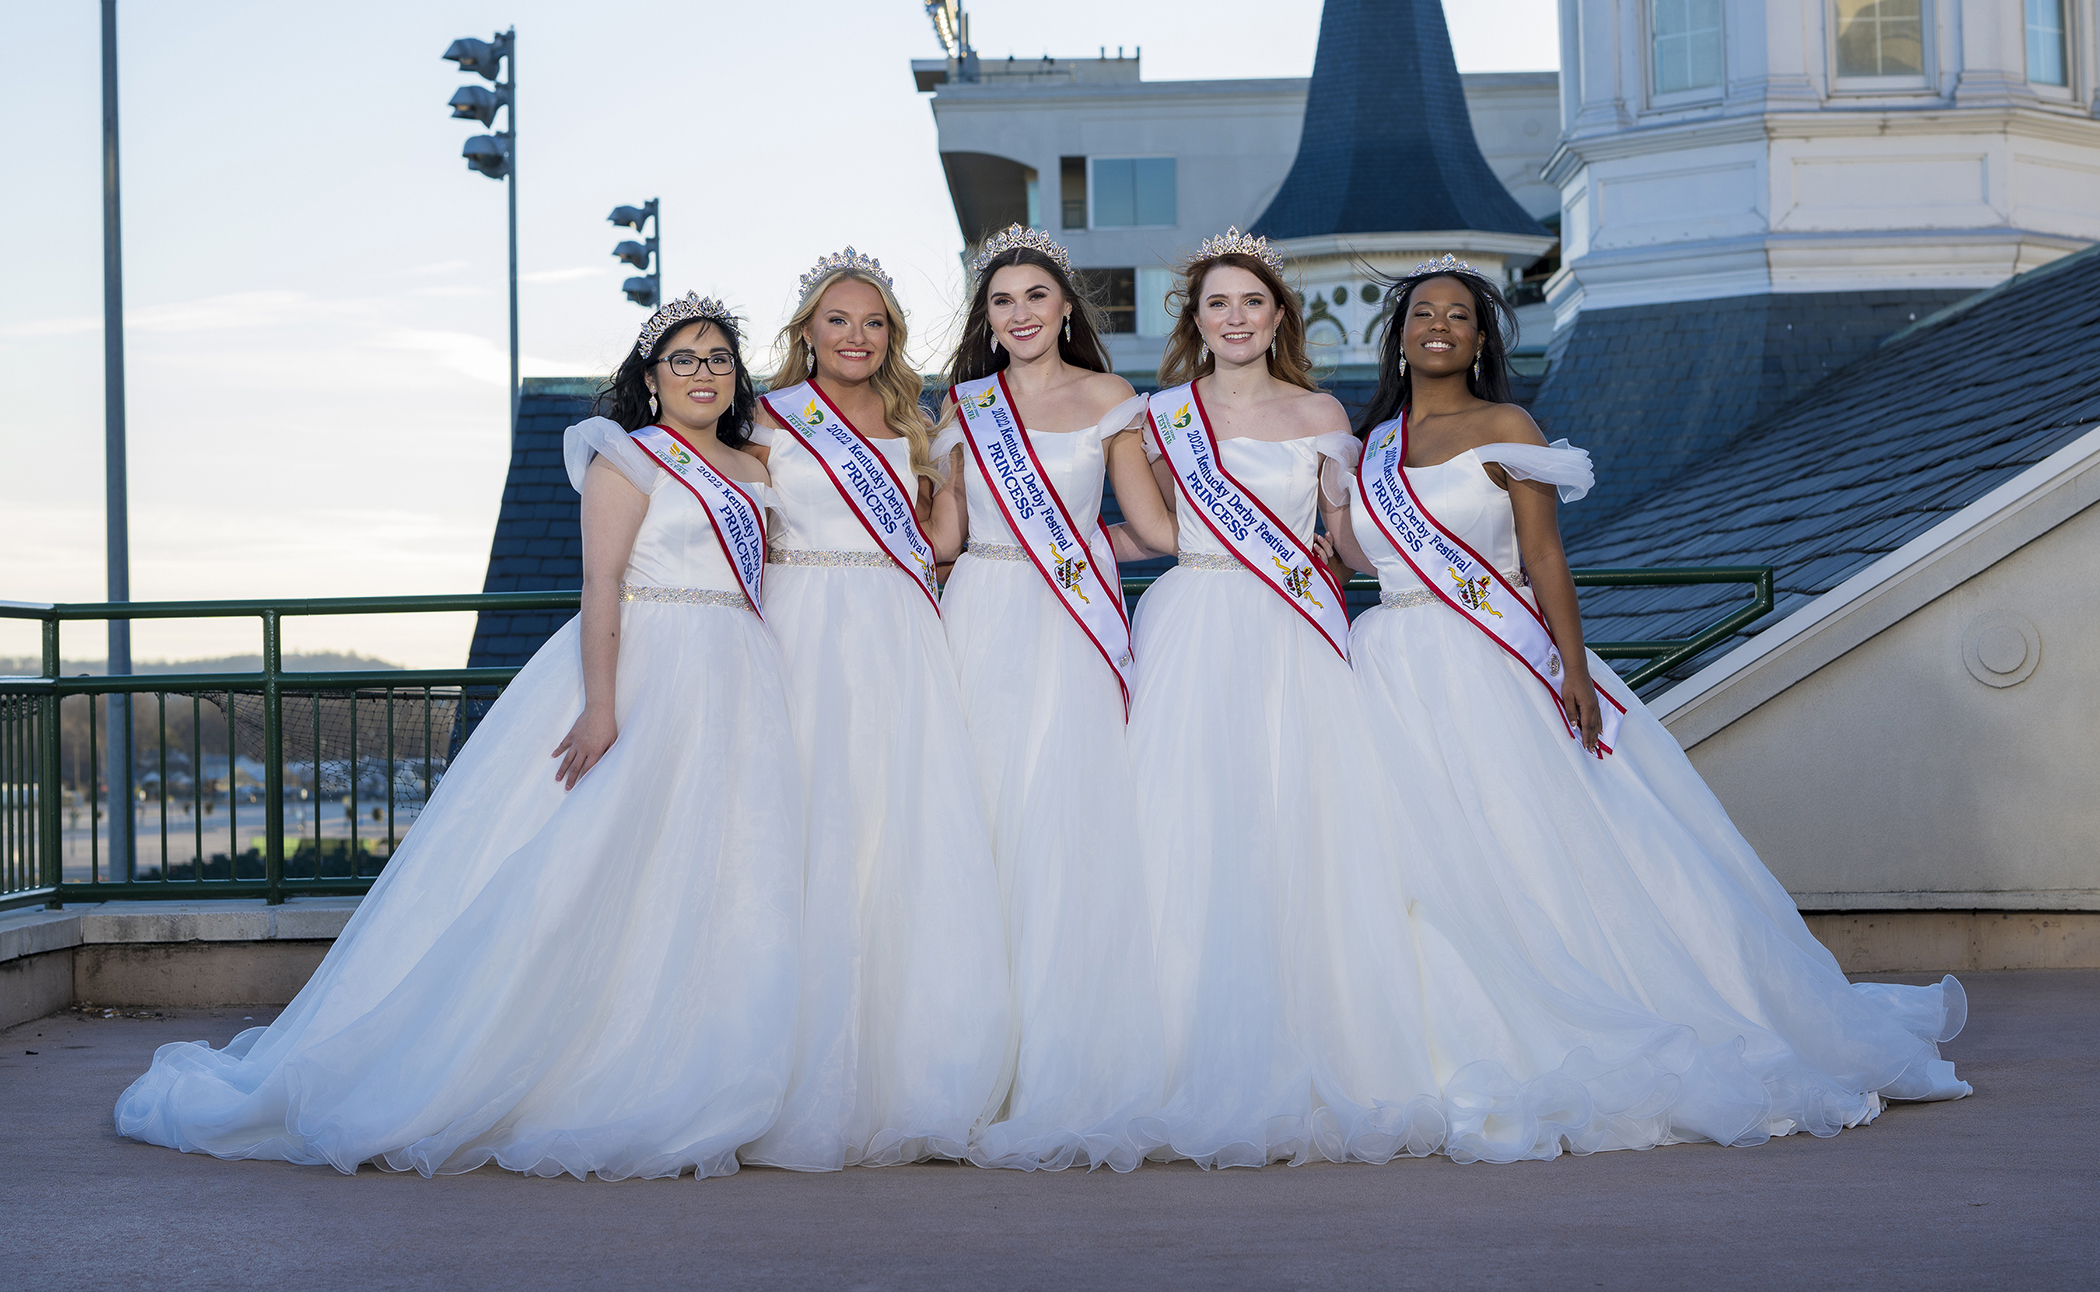 UofL students Nancy Ngo (far left) and Jimi Porter (far right) have been named to the 2022 Kentucky Derby Festival Royal Court.